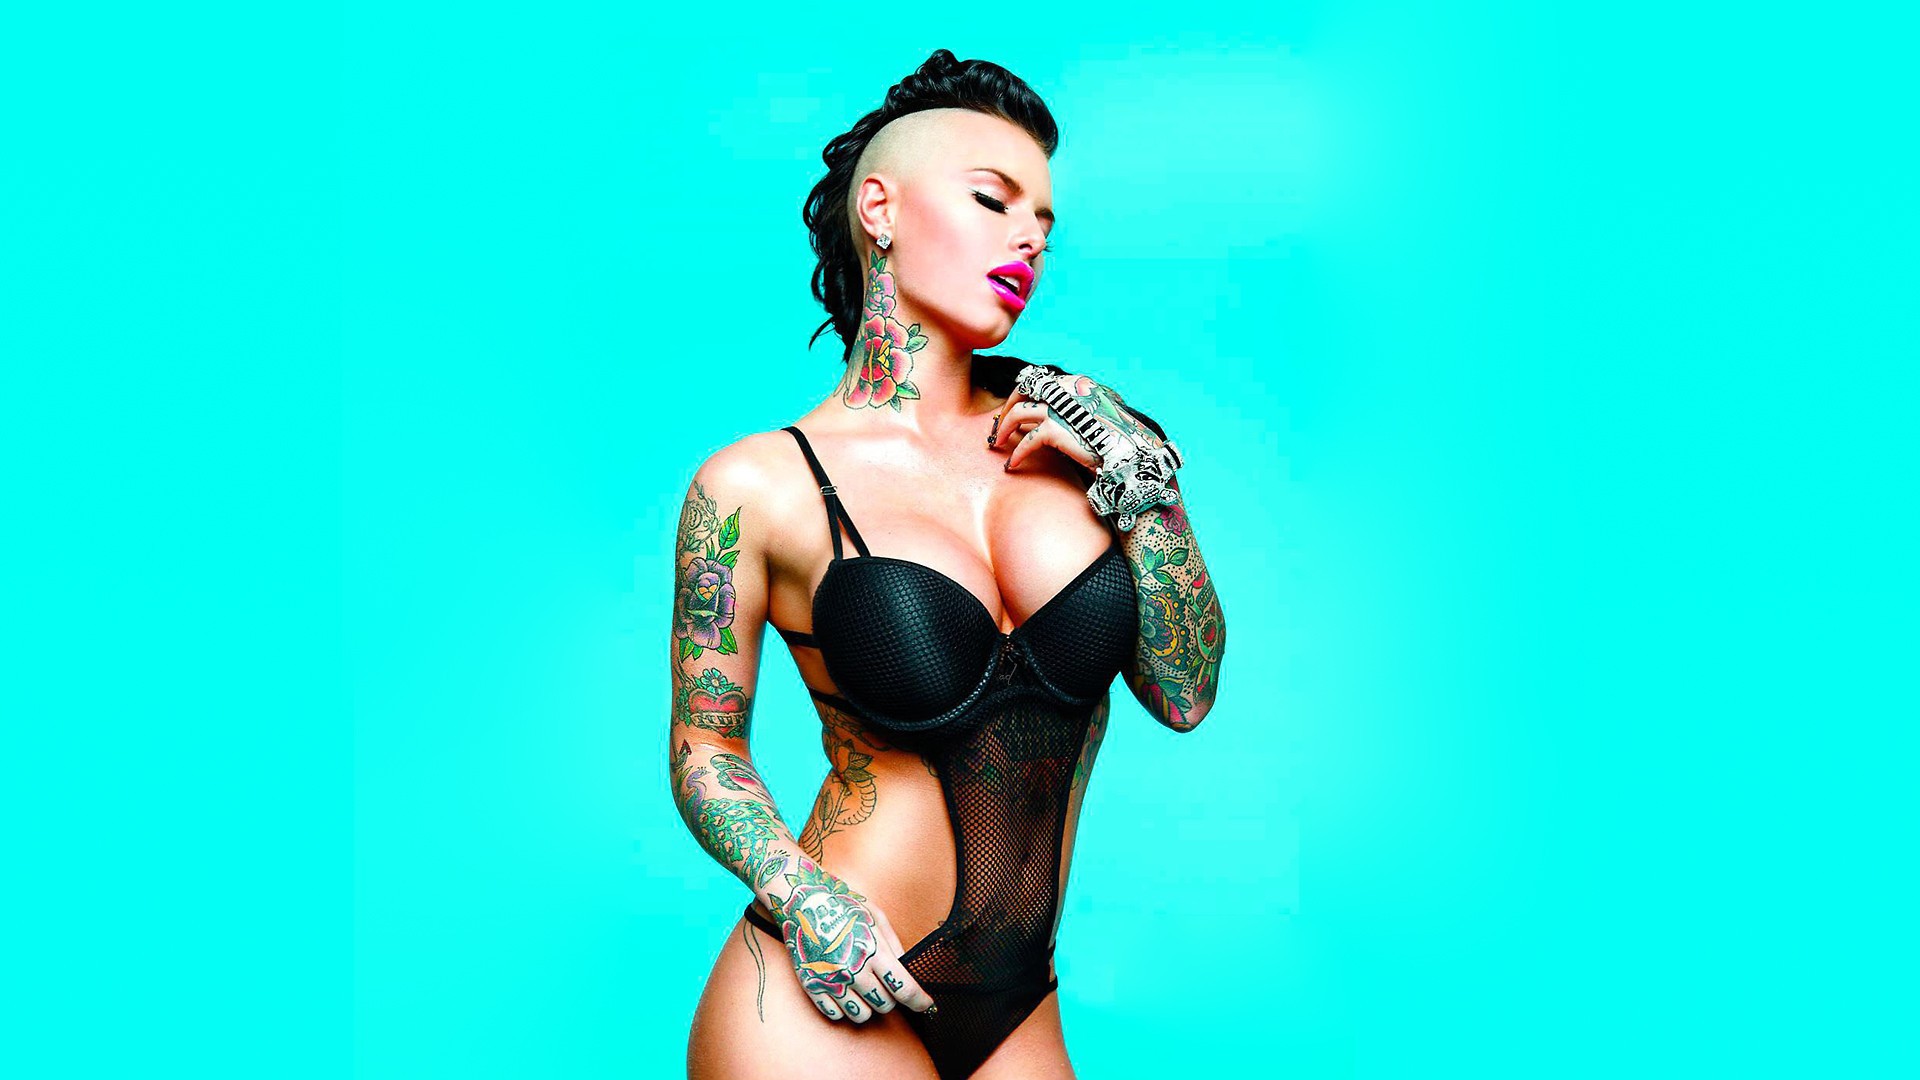 All Christy Mack wallpapers.